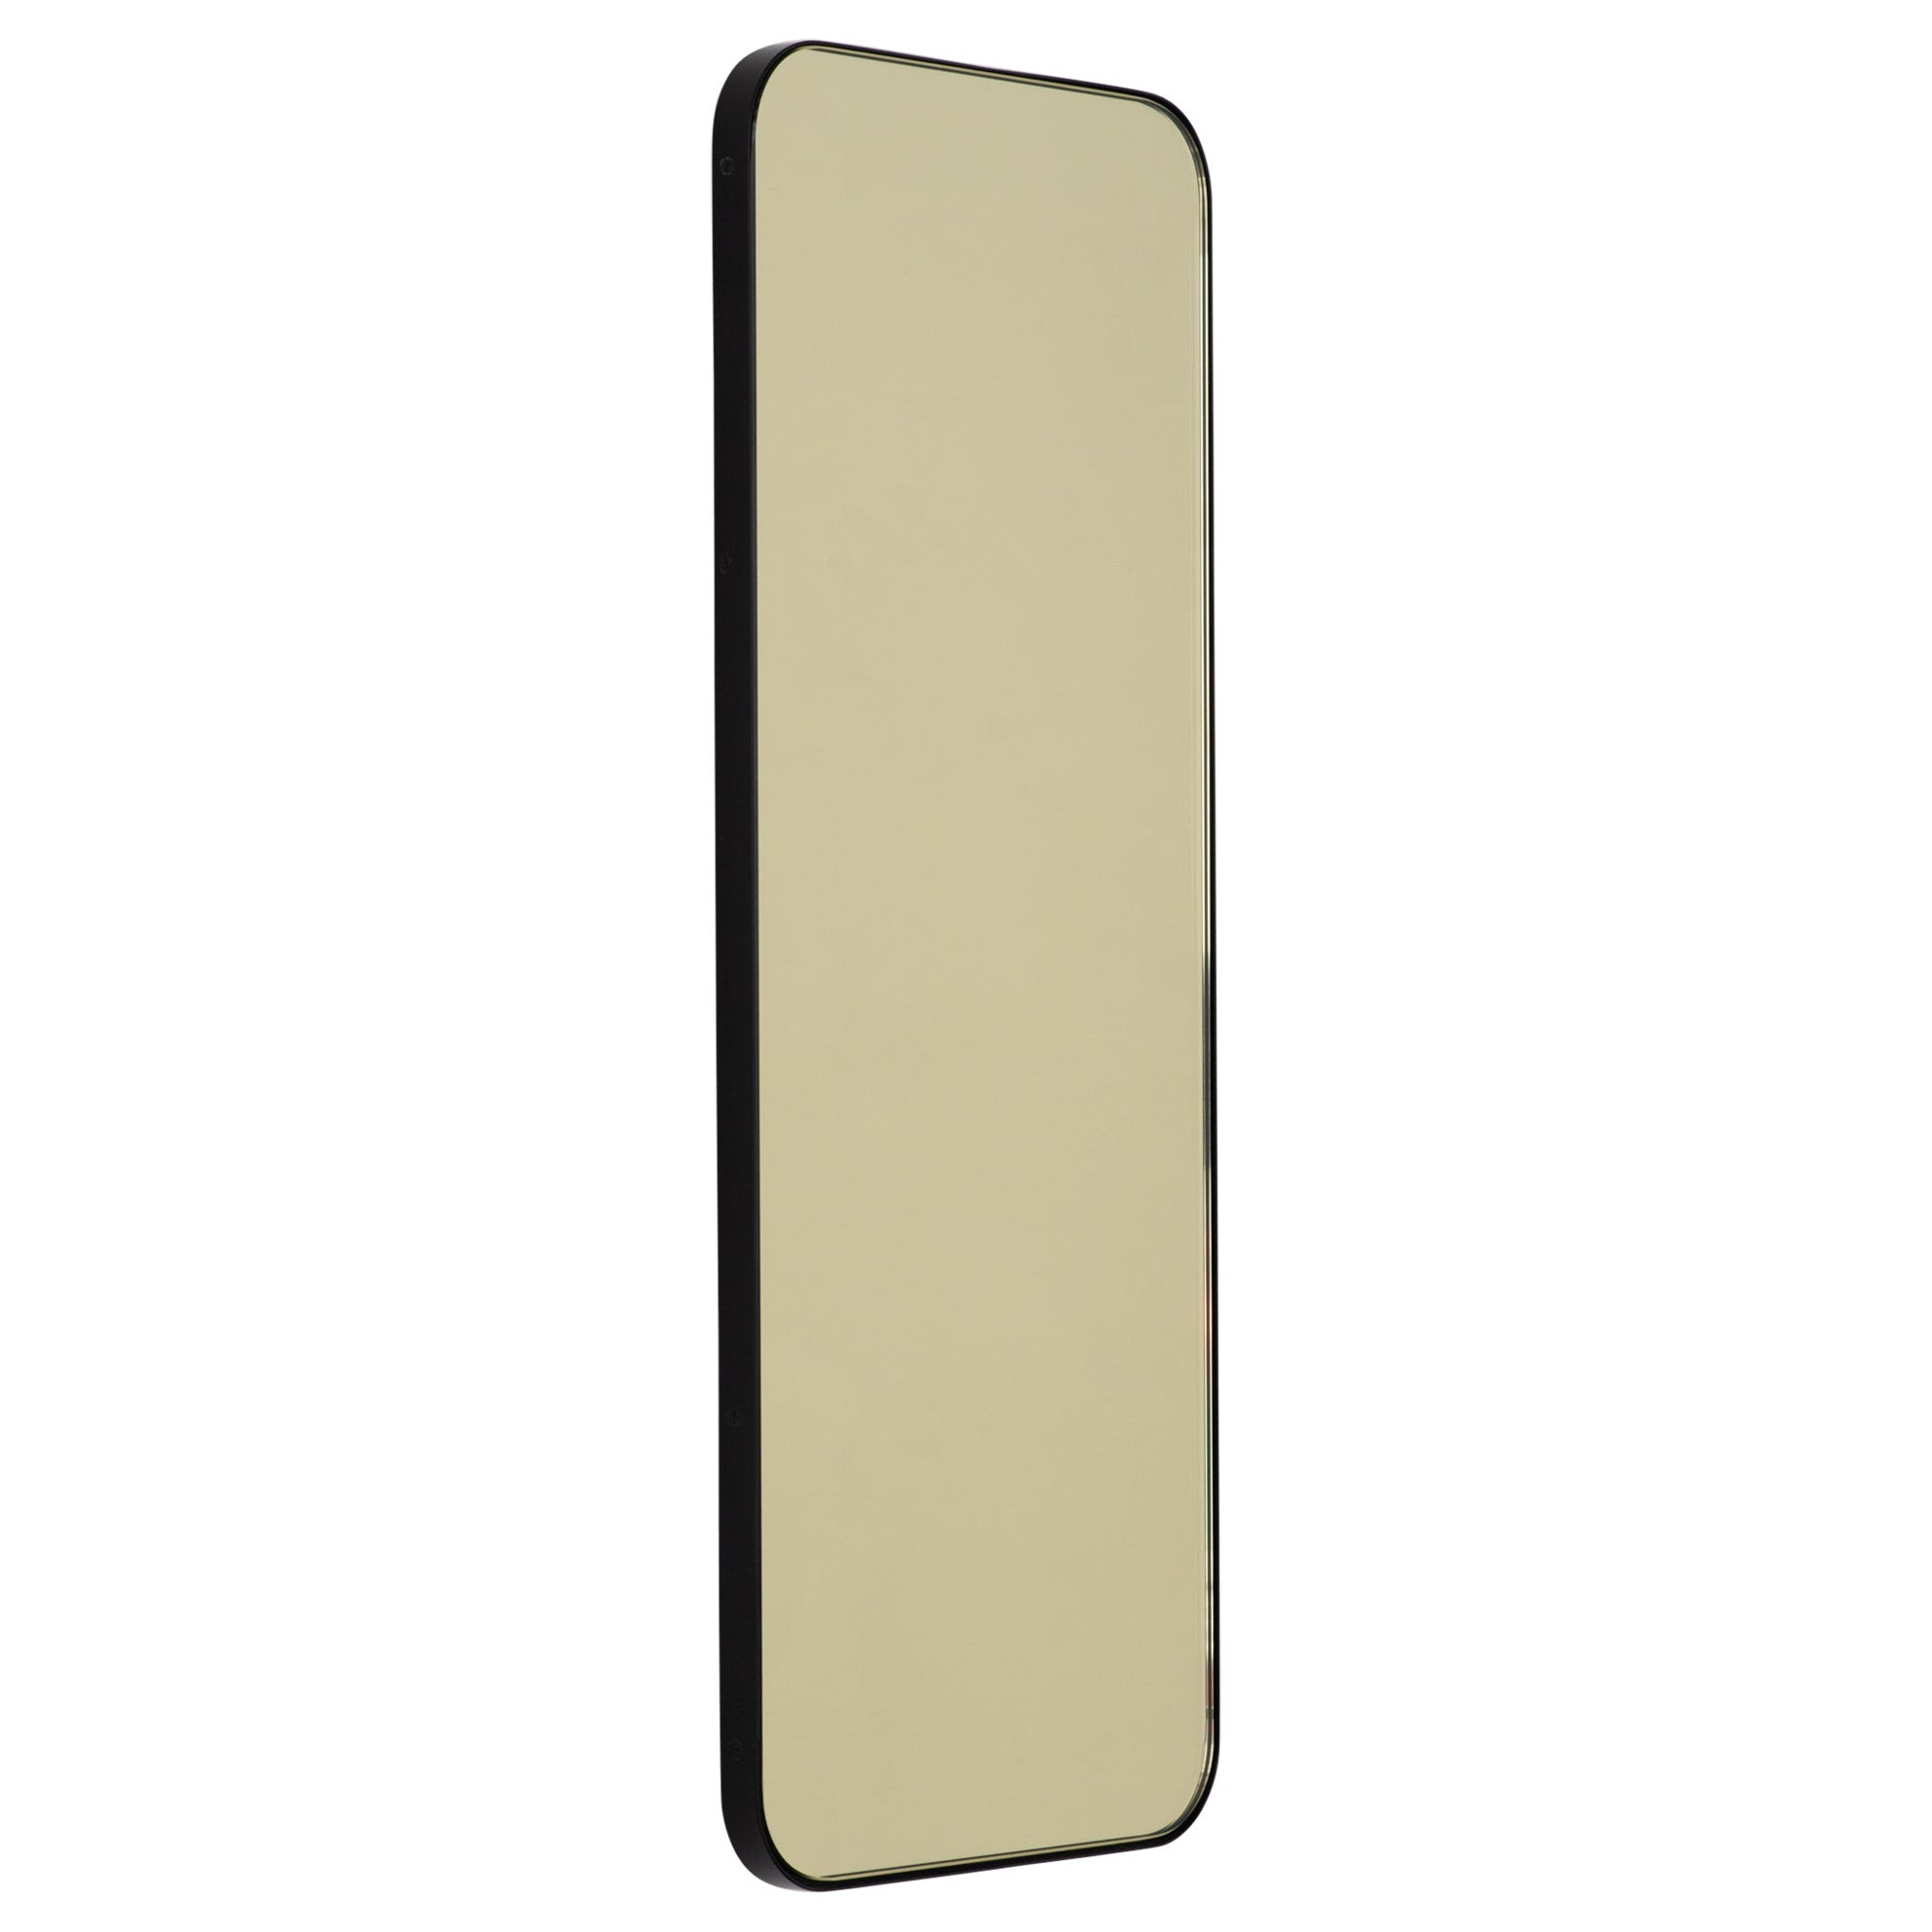 Quadris Gold Tinted Rectangular Contemporary Mirror with a Black Frame, Large For Sale